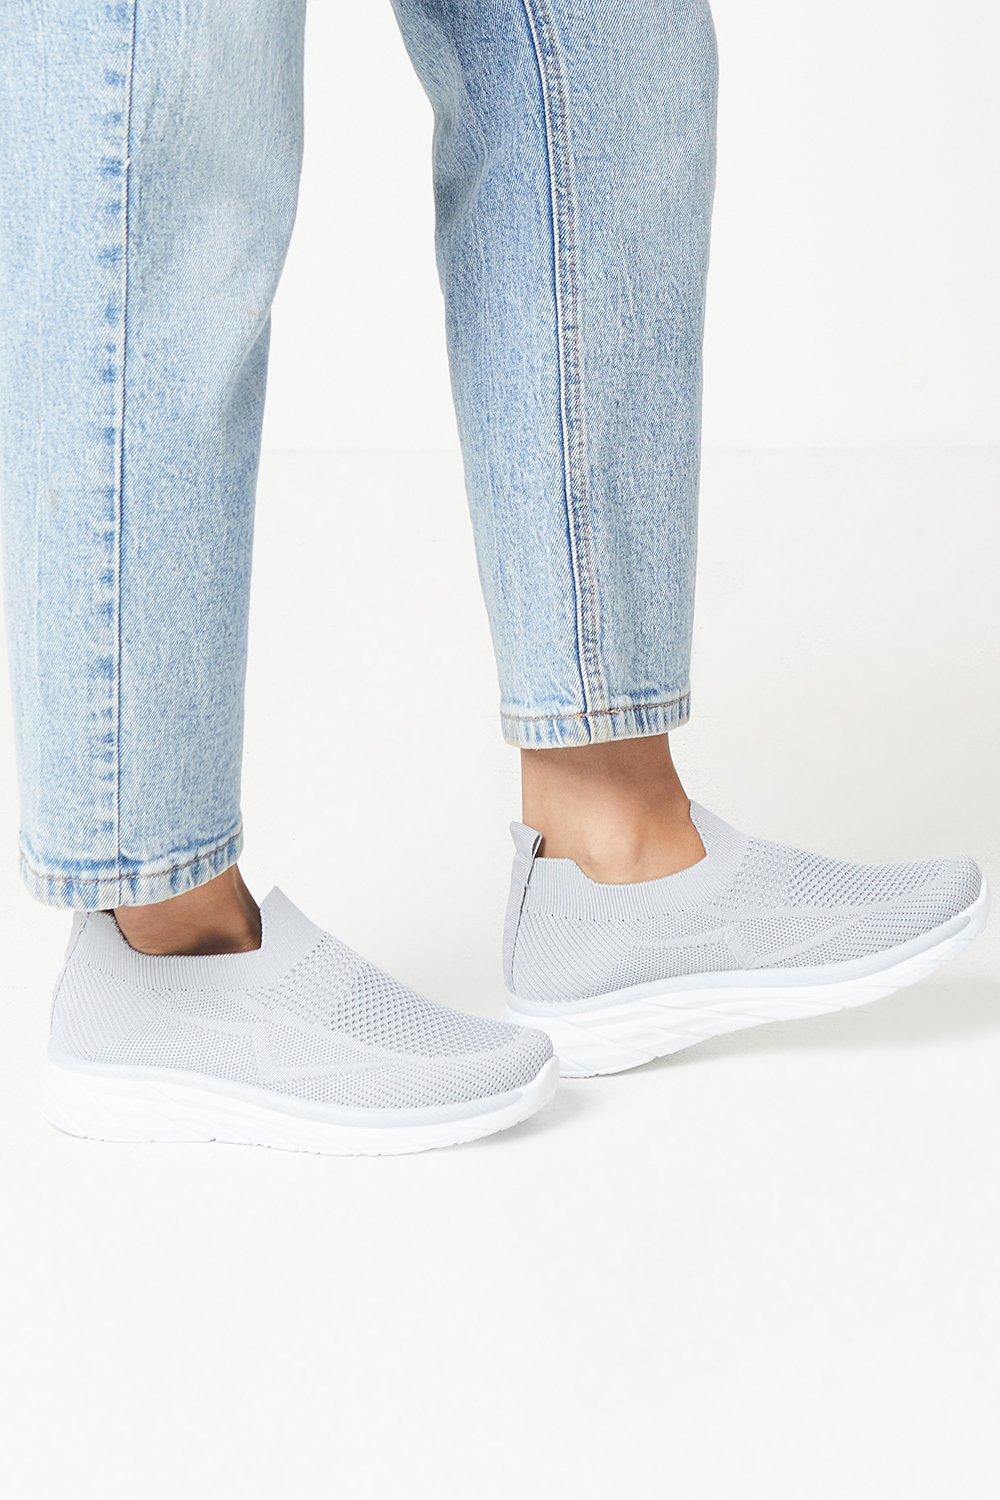 Womens Good For The Sole: Annabel Knitted Slip On Trainers